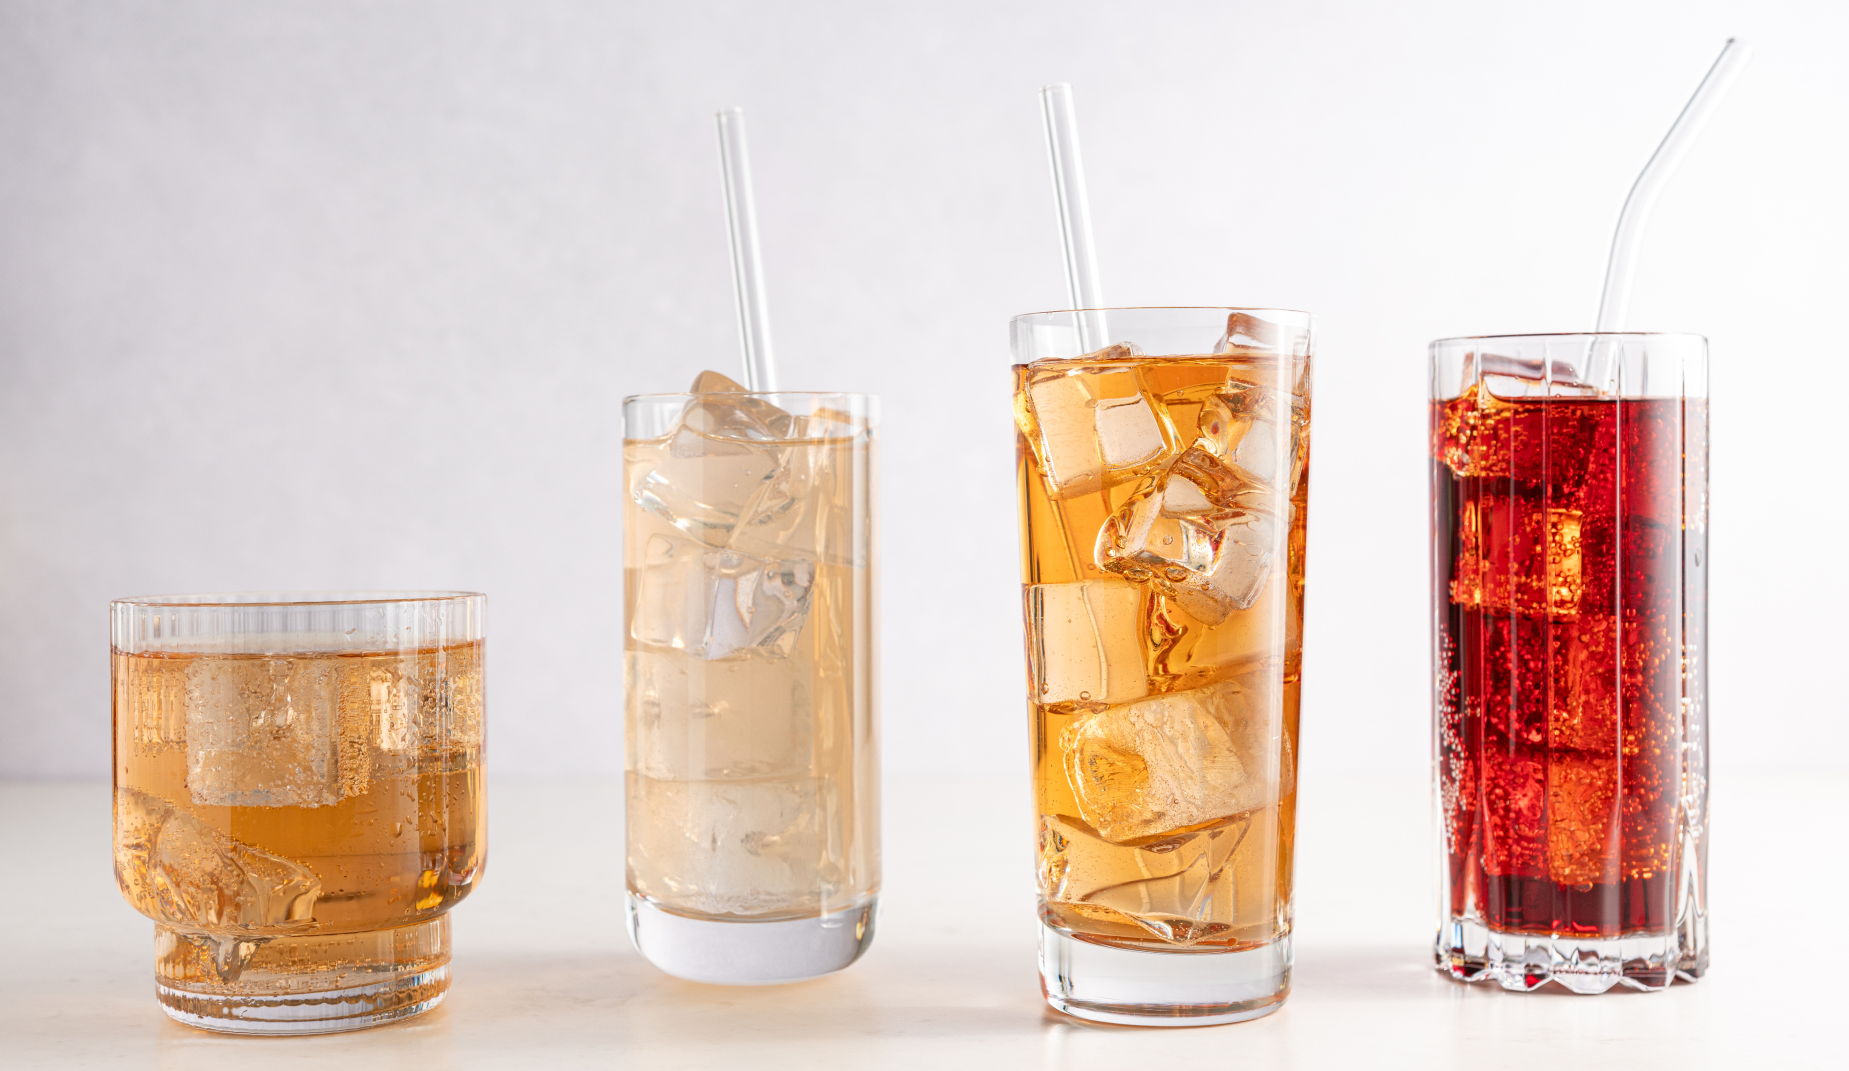 The new EXBERRY® browns can be used in applications including apple drinks, ginger ale, energy drinks, and natural cola (photo credit: GNT)